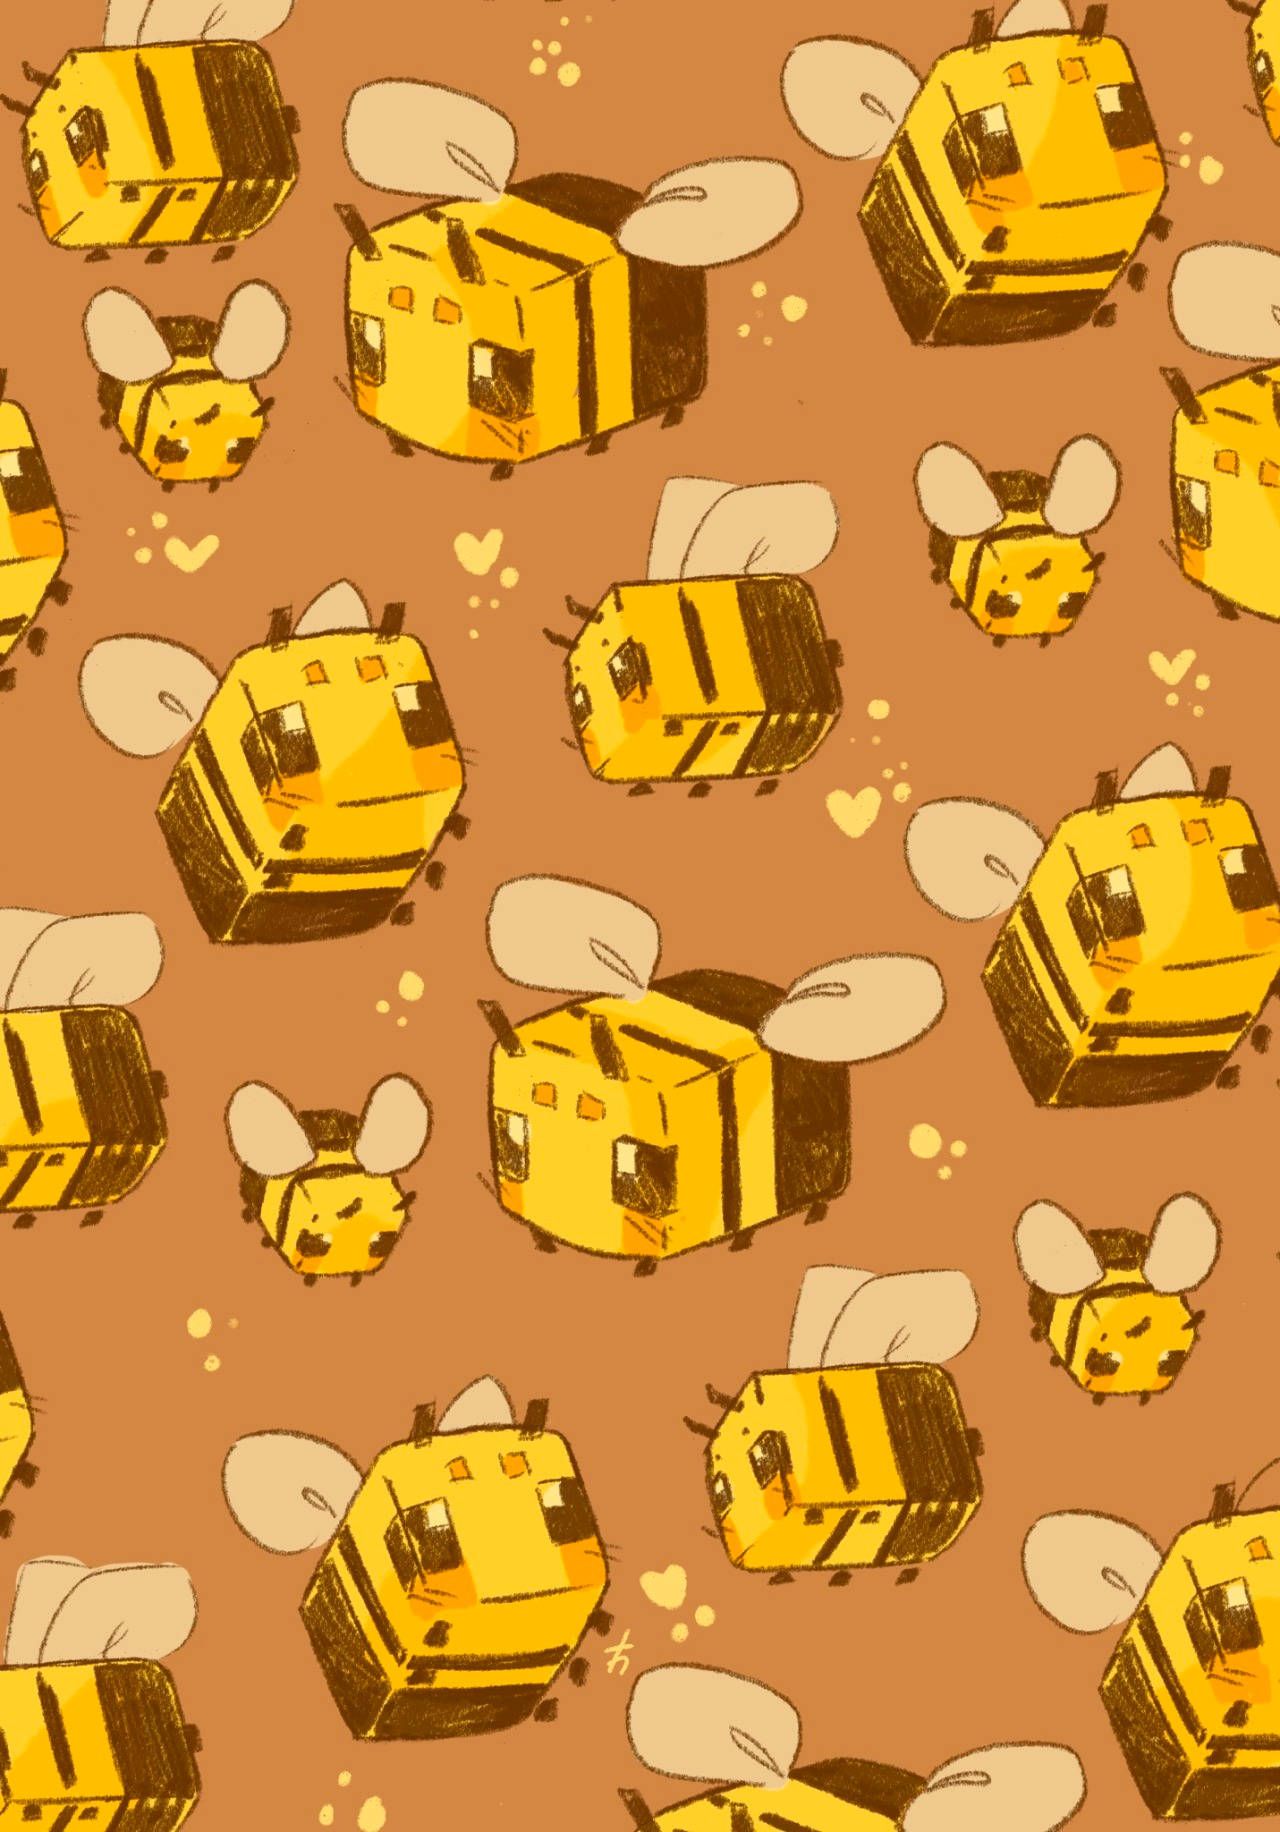 A pattern of bees and hearts on brown background - Bee